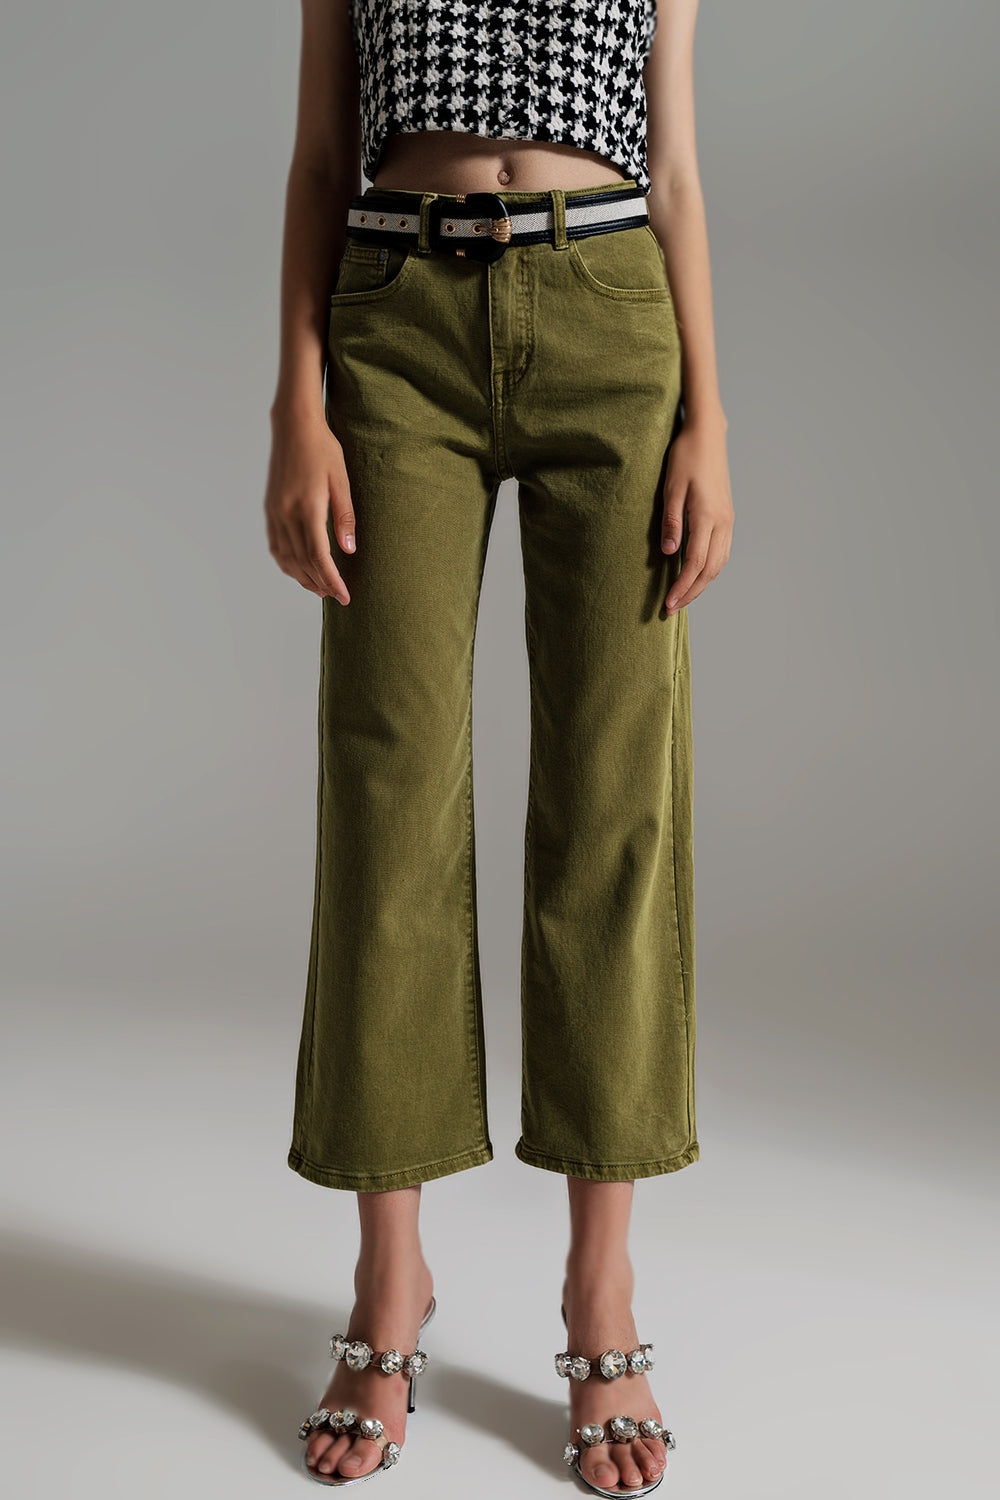 Q2 Cropped wide leg jeans in Olive green